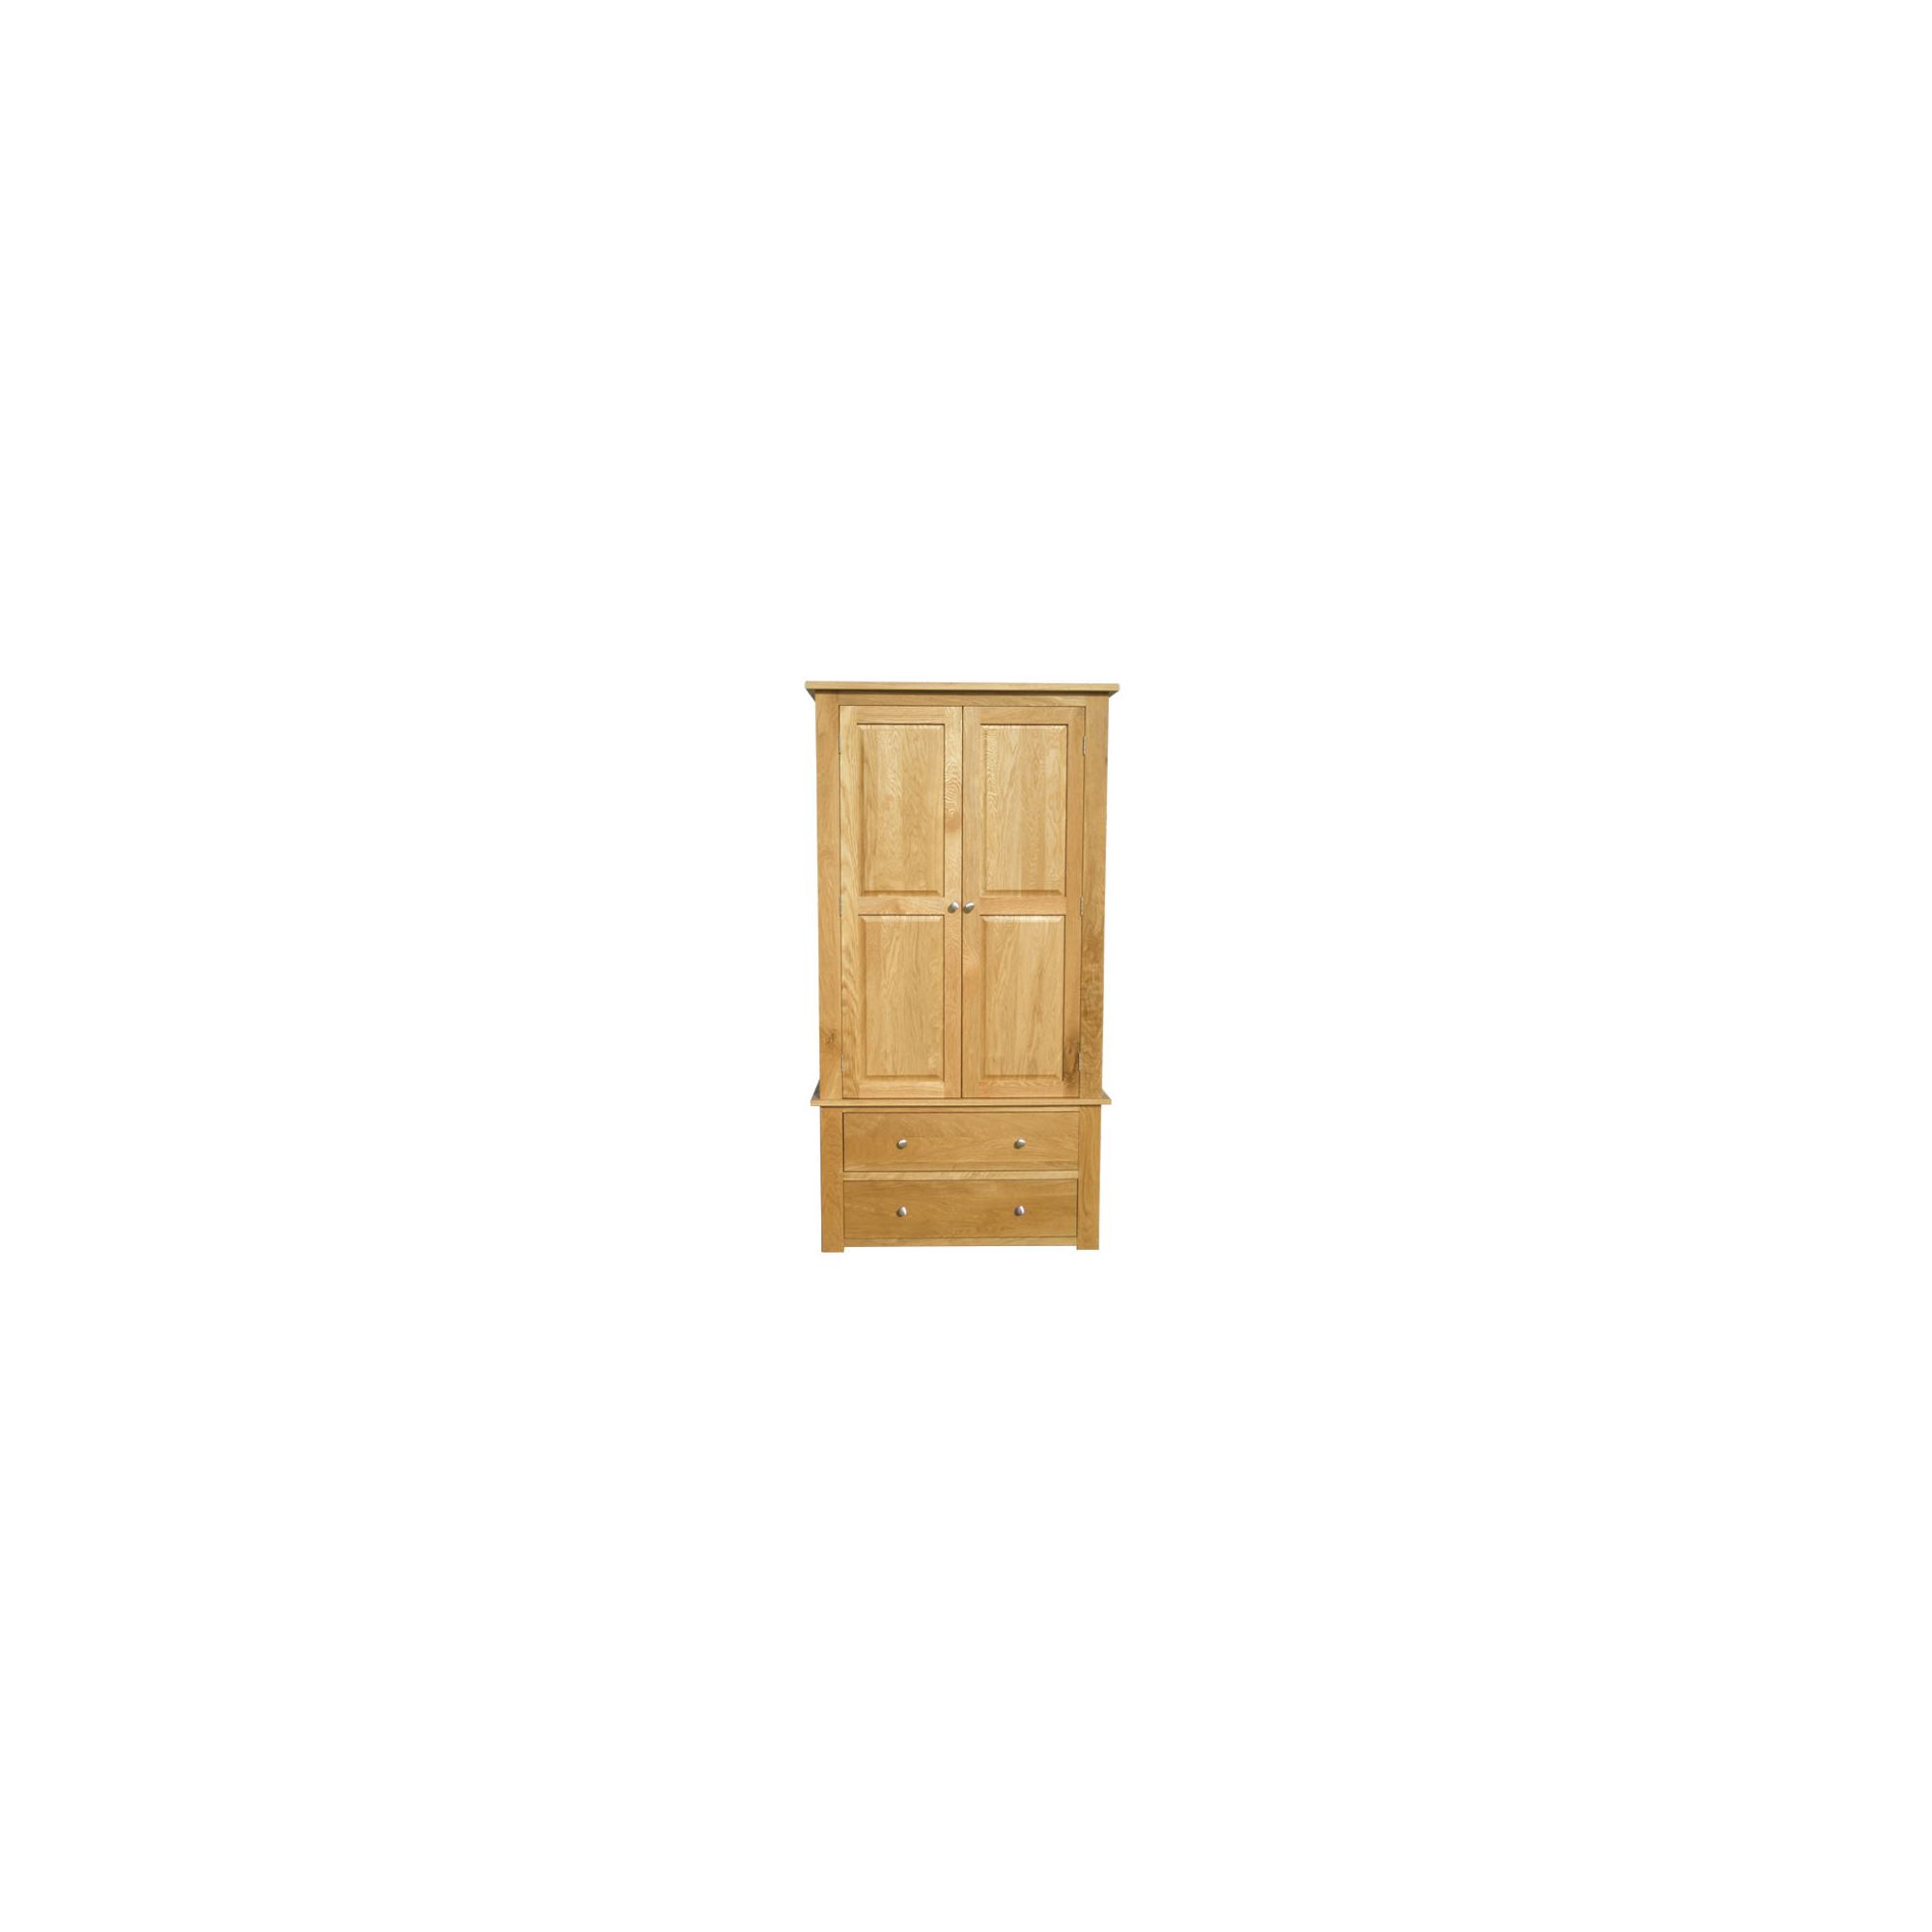 Home Zone Furniture Lincoln Oak 2009 Two Door Wardrobe at Tesco Direct